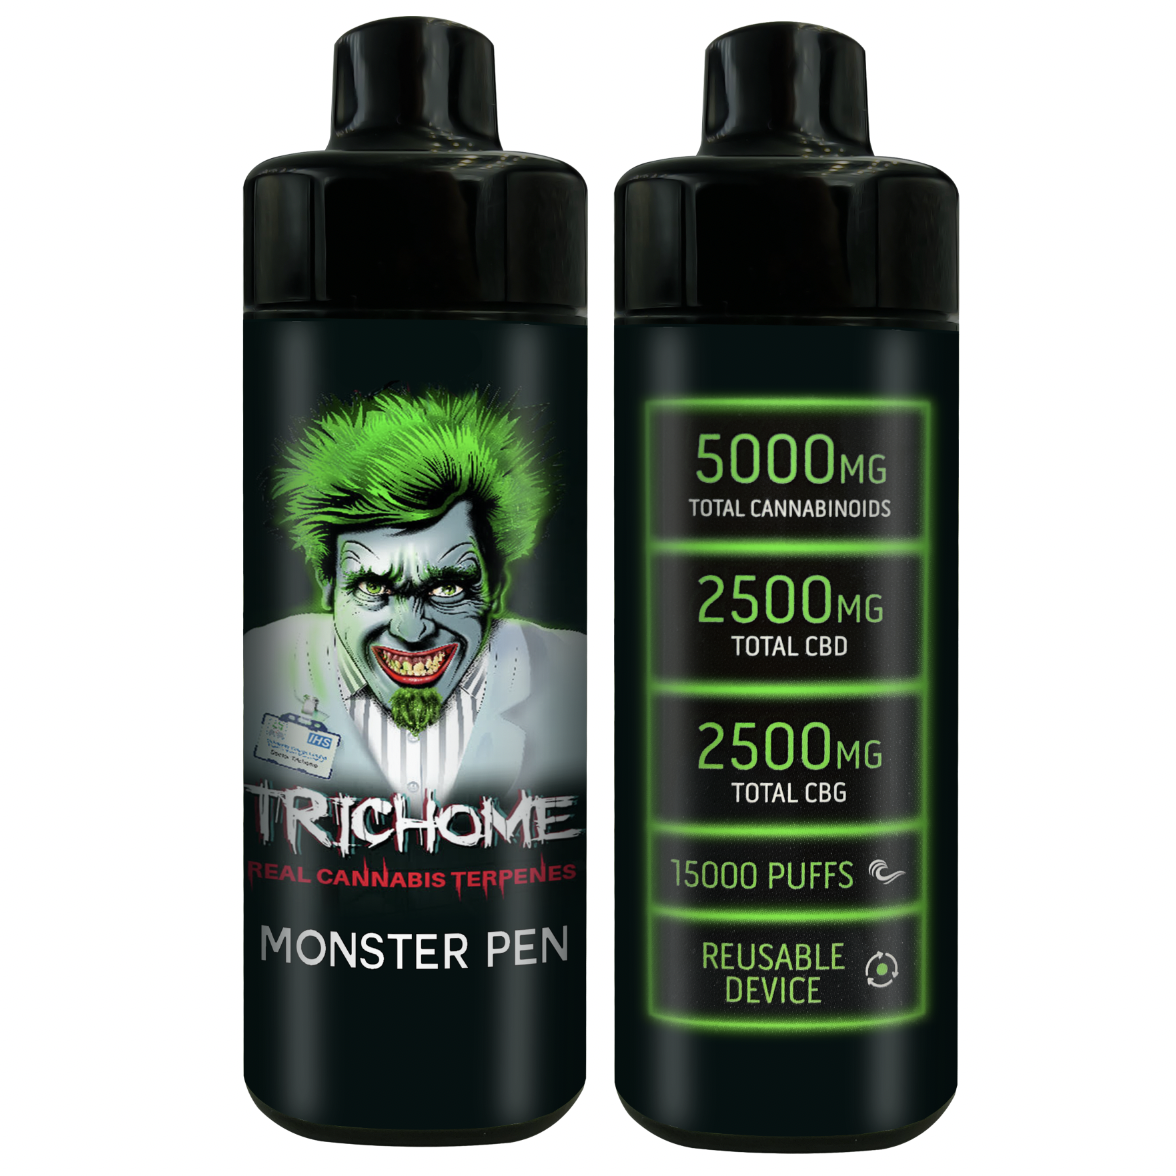 Dr Trichome Monster Pen 5000mg 15,000 puff